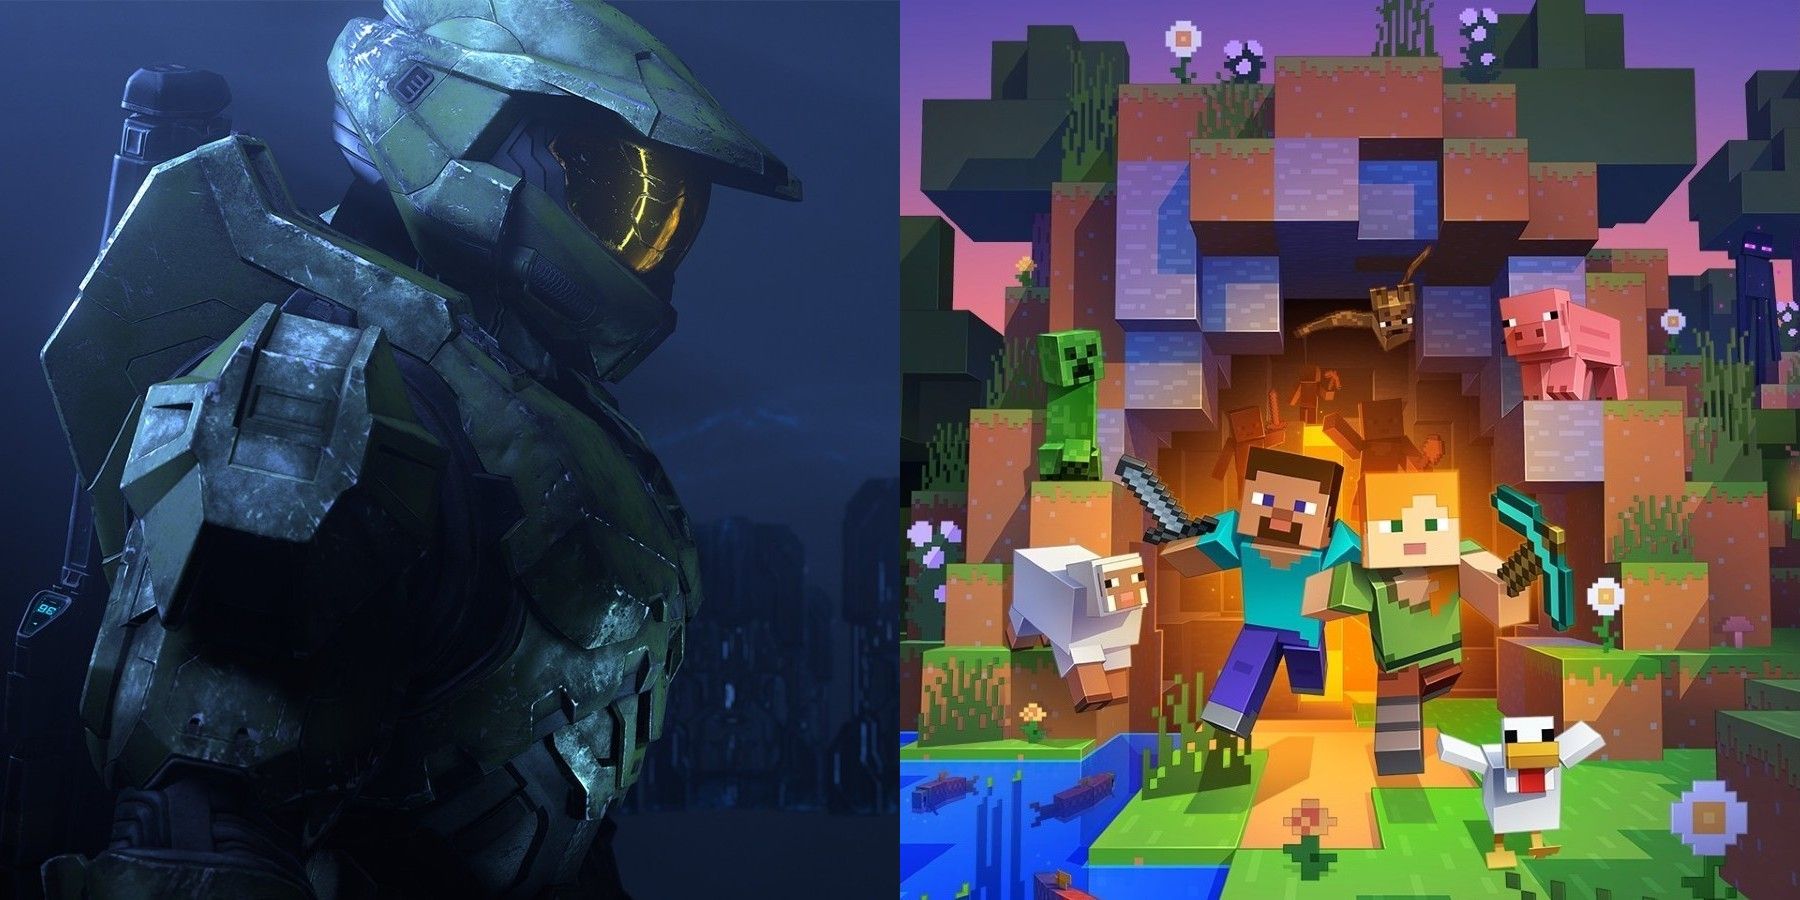 Halo Infinite Forge User Creates Minecraft's Nether and Village